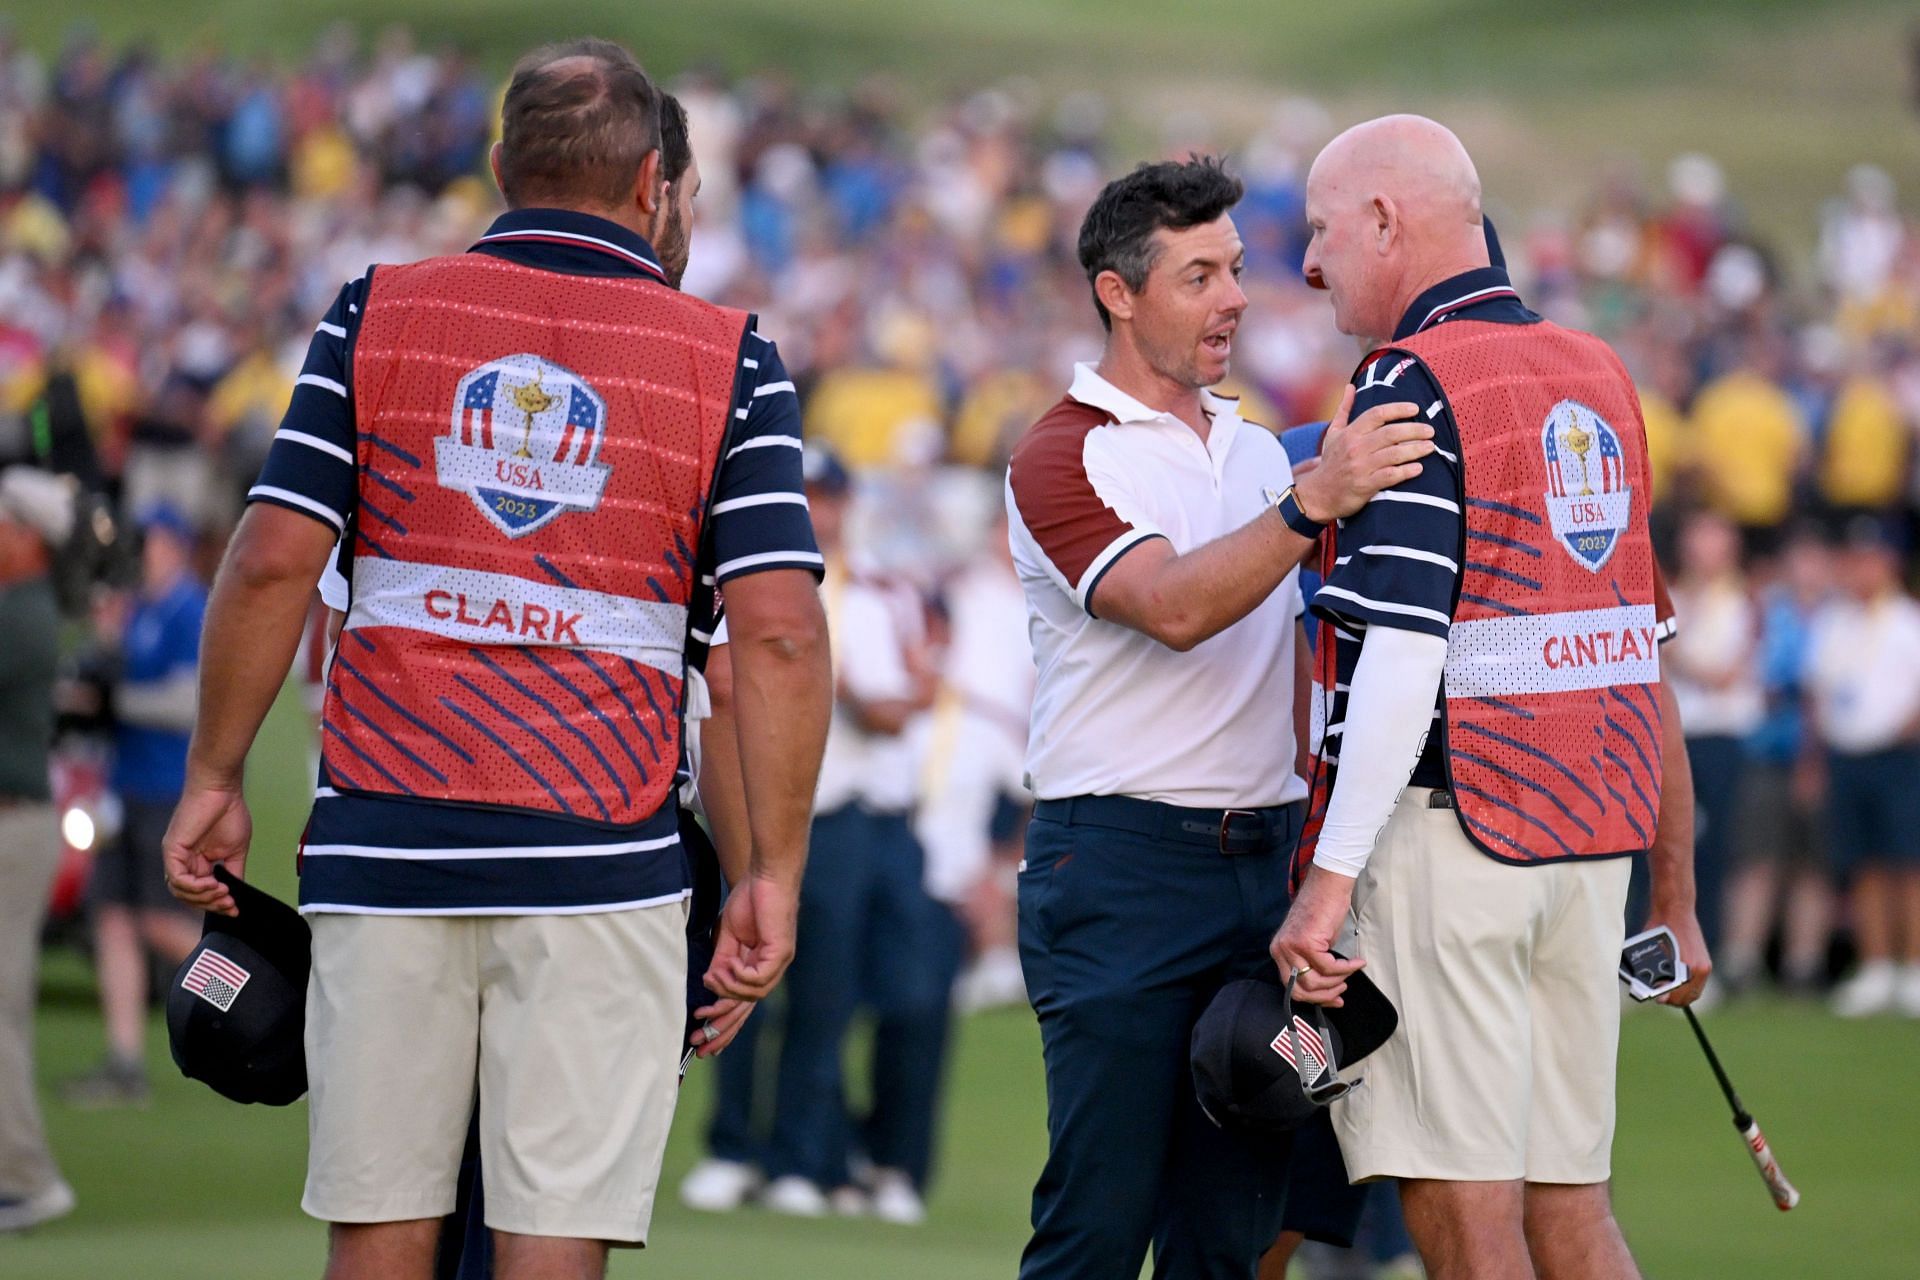 Rory McIlroy of Team Europe speaks with Joe LaCava on the 18th green during the Saturday afternoon fourball matches of the 2023 Ryder Cup (Image via Getty)